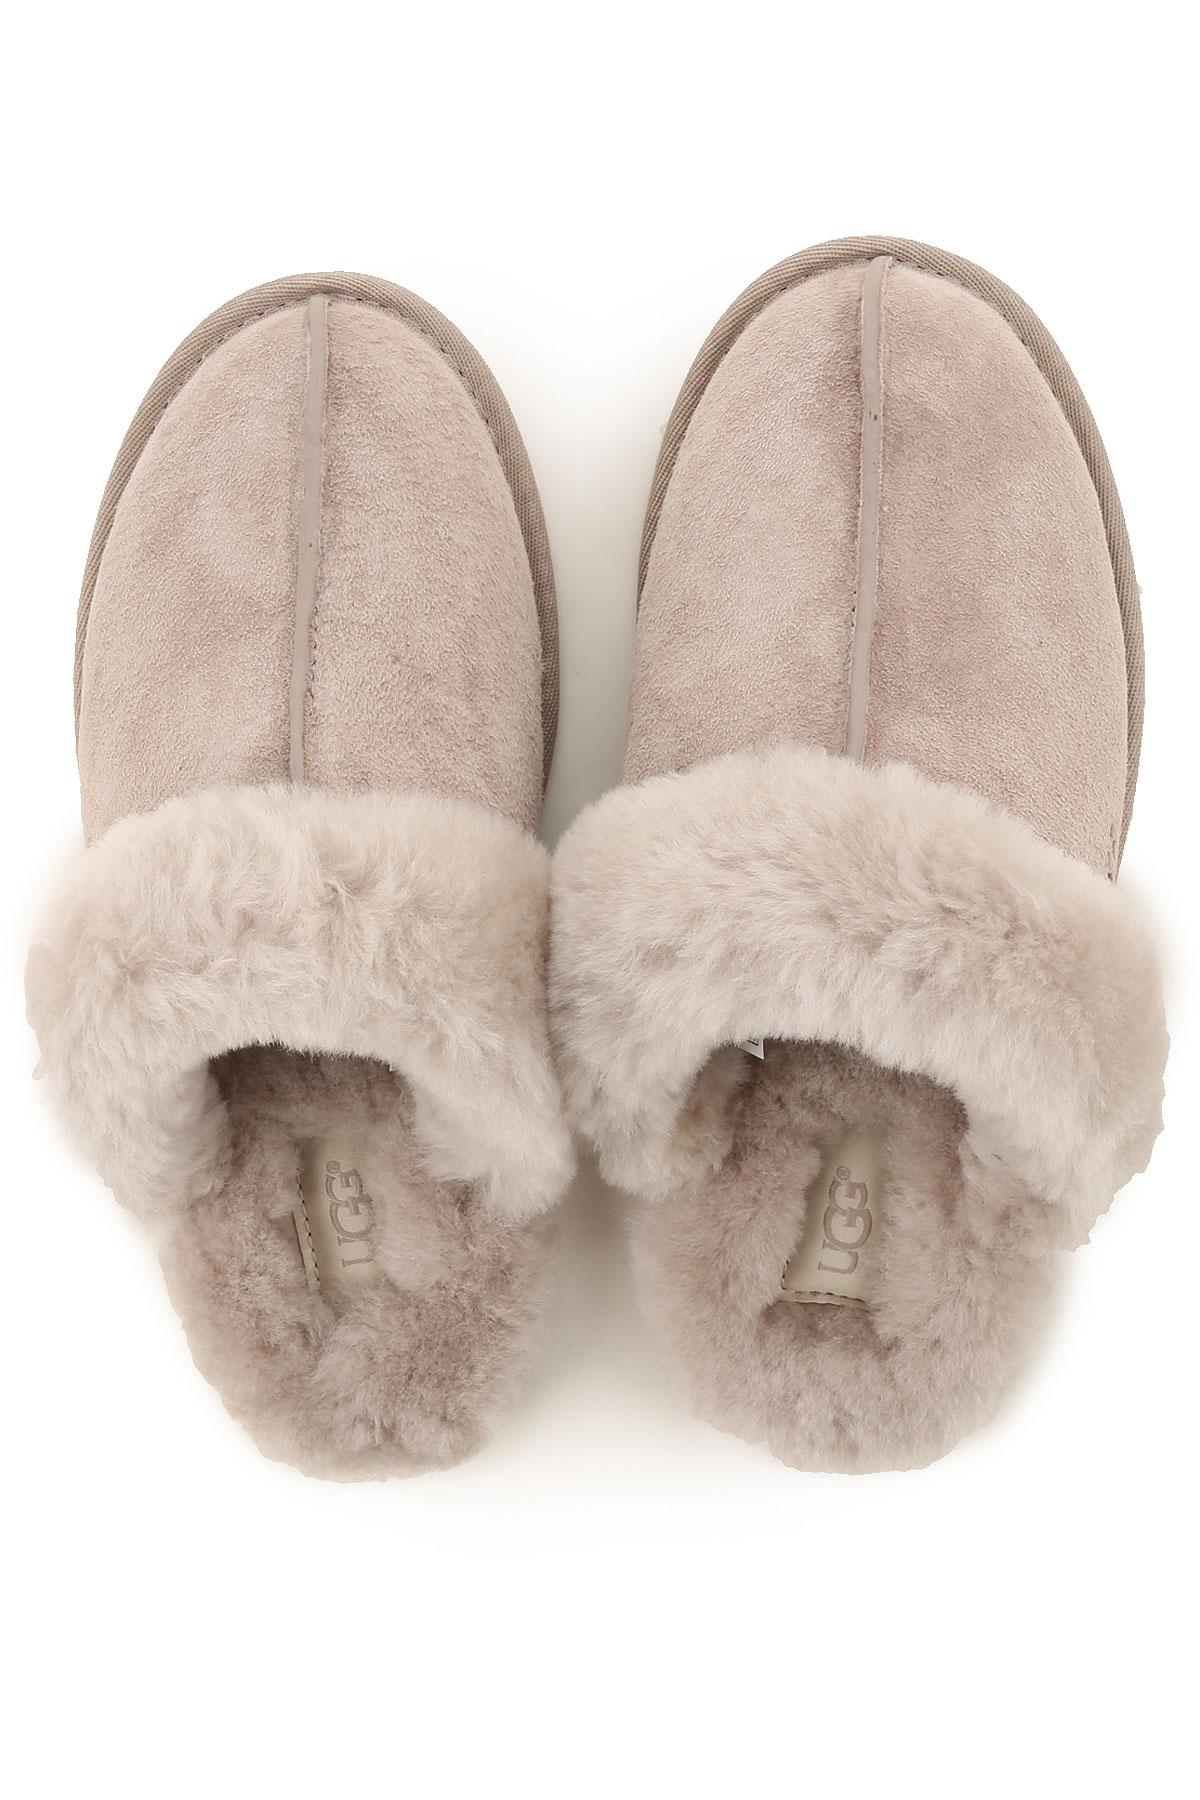 UGG Fur Sandals For Women in Oyster Grey (Gray) - Lyst